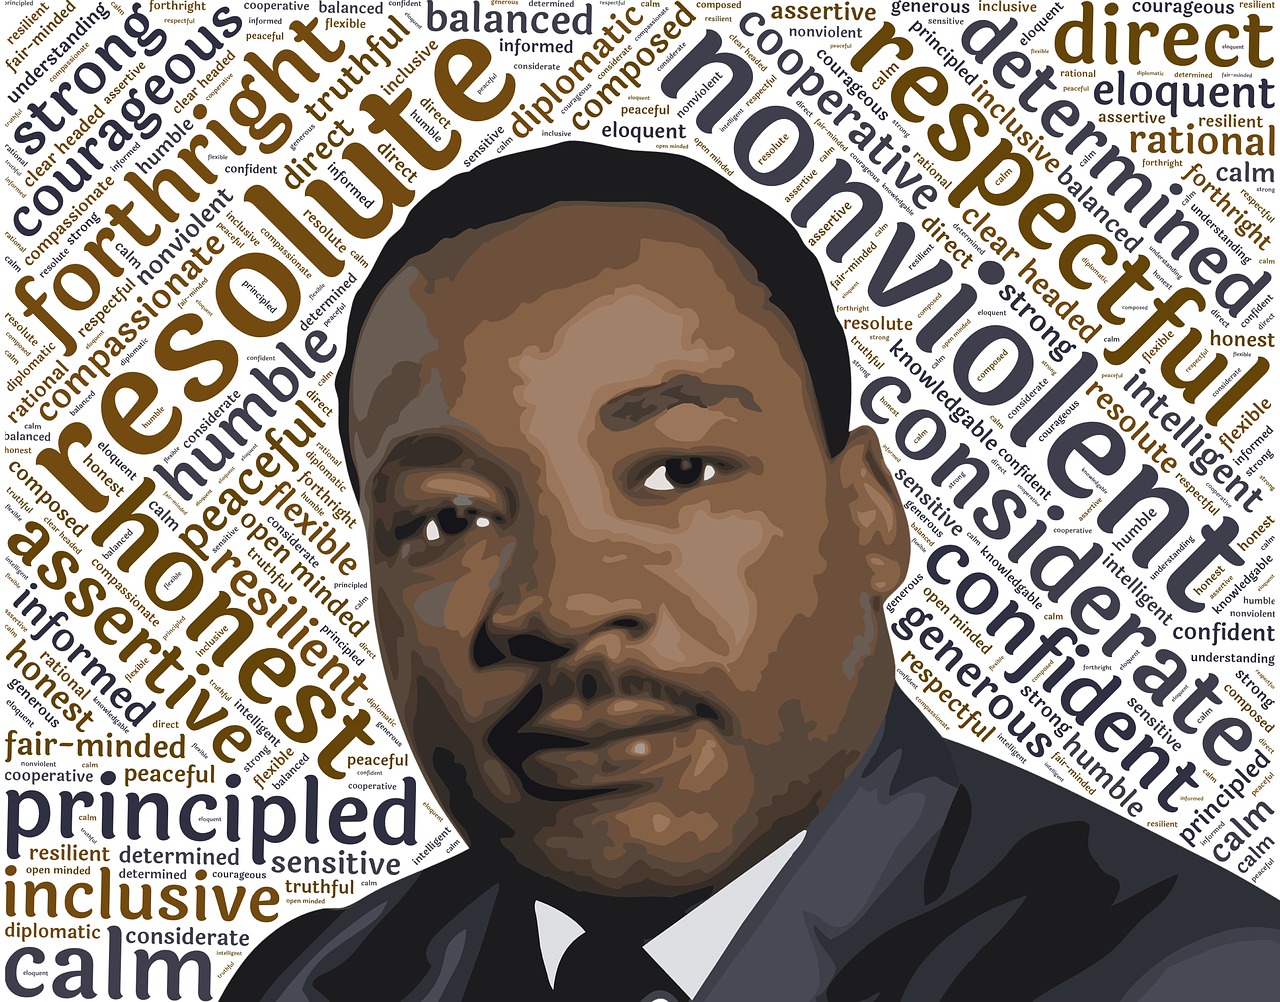 leadership qualities martin luther king free photo